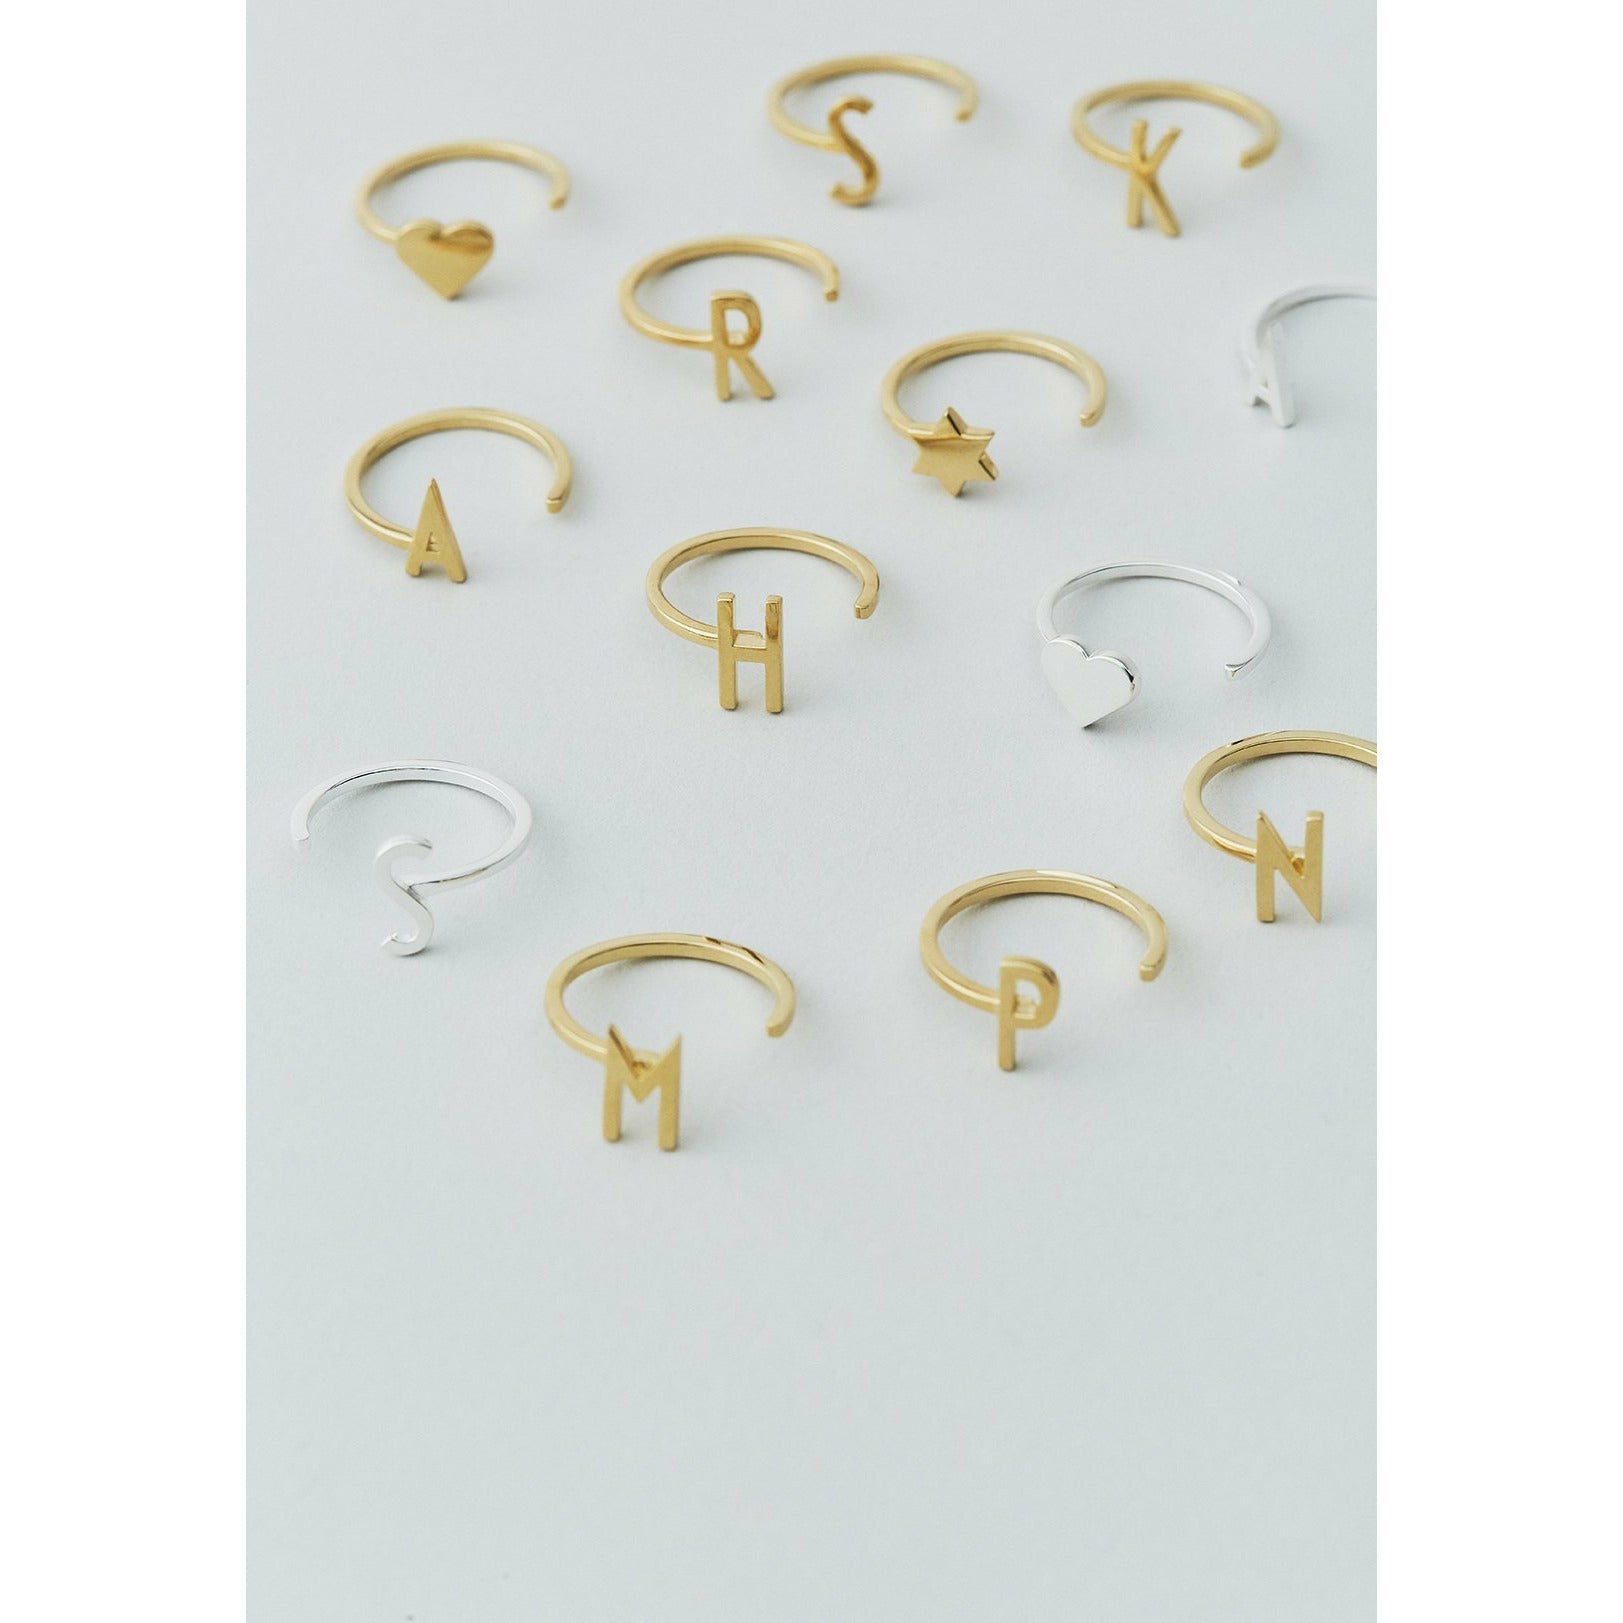 Design Letters Brevring A Z, 18K Gold Plated, W